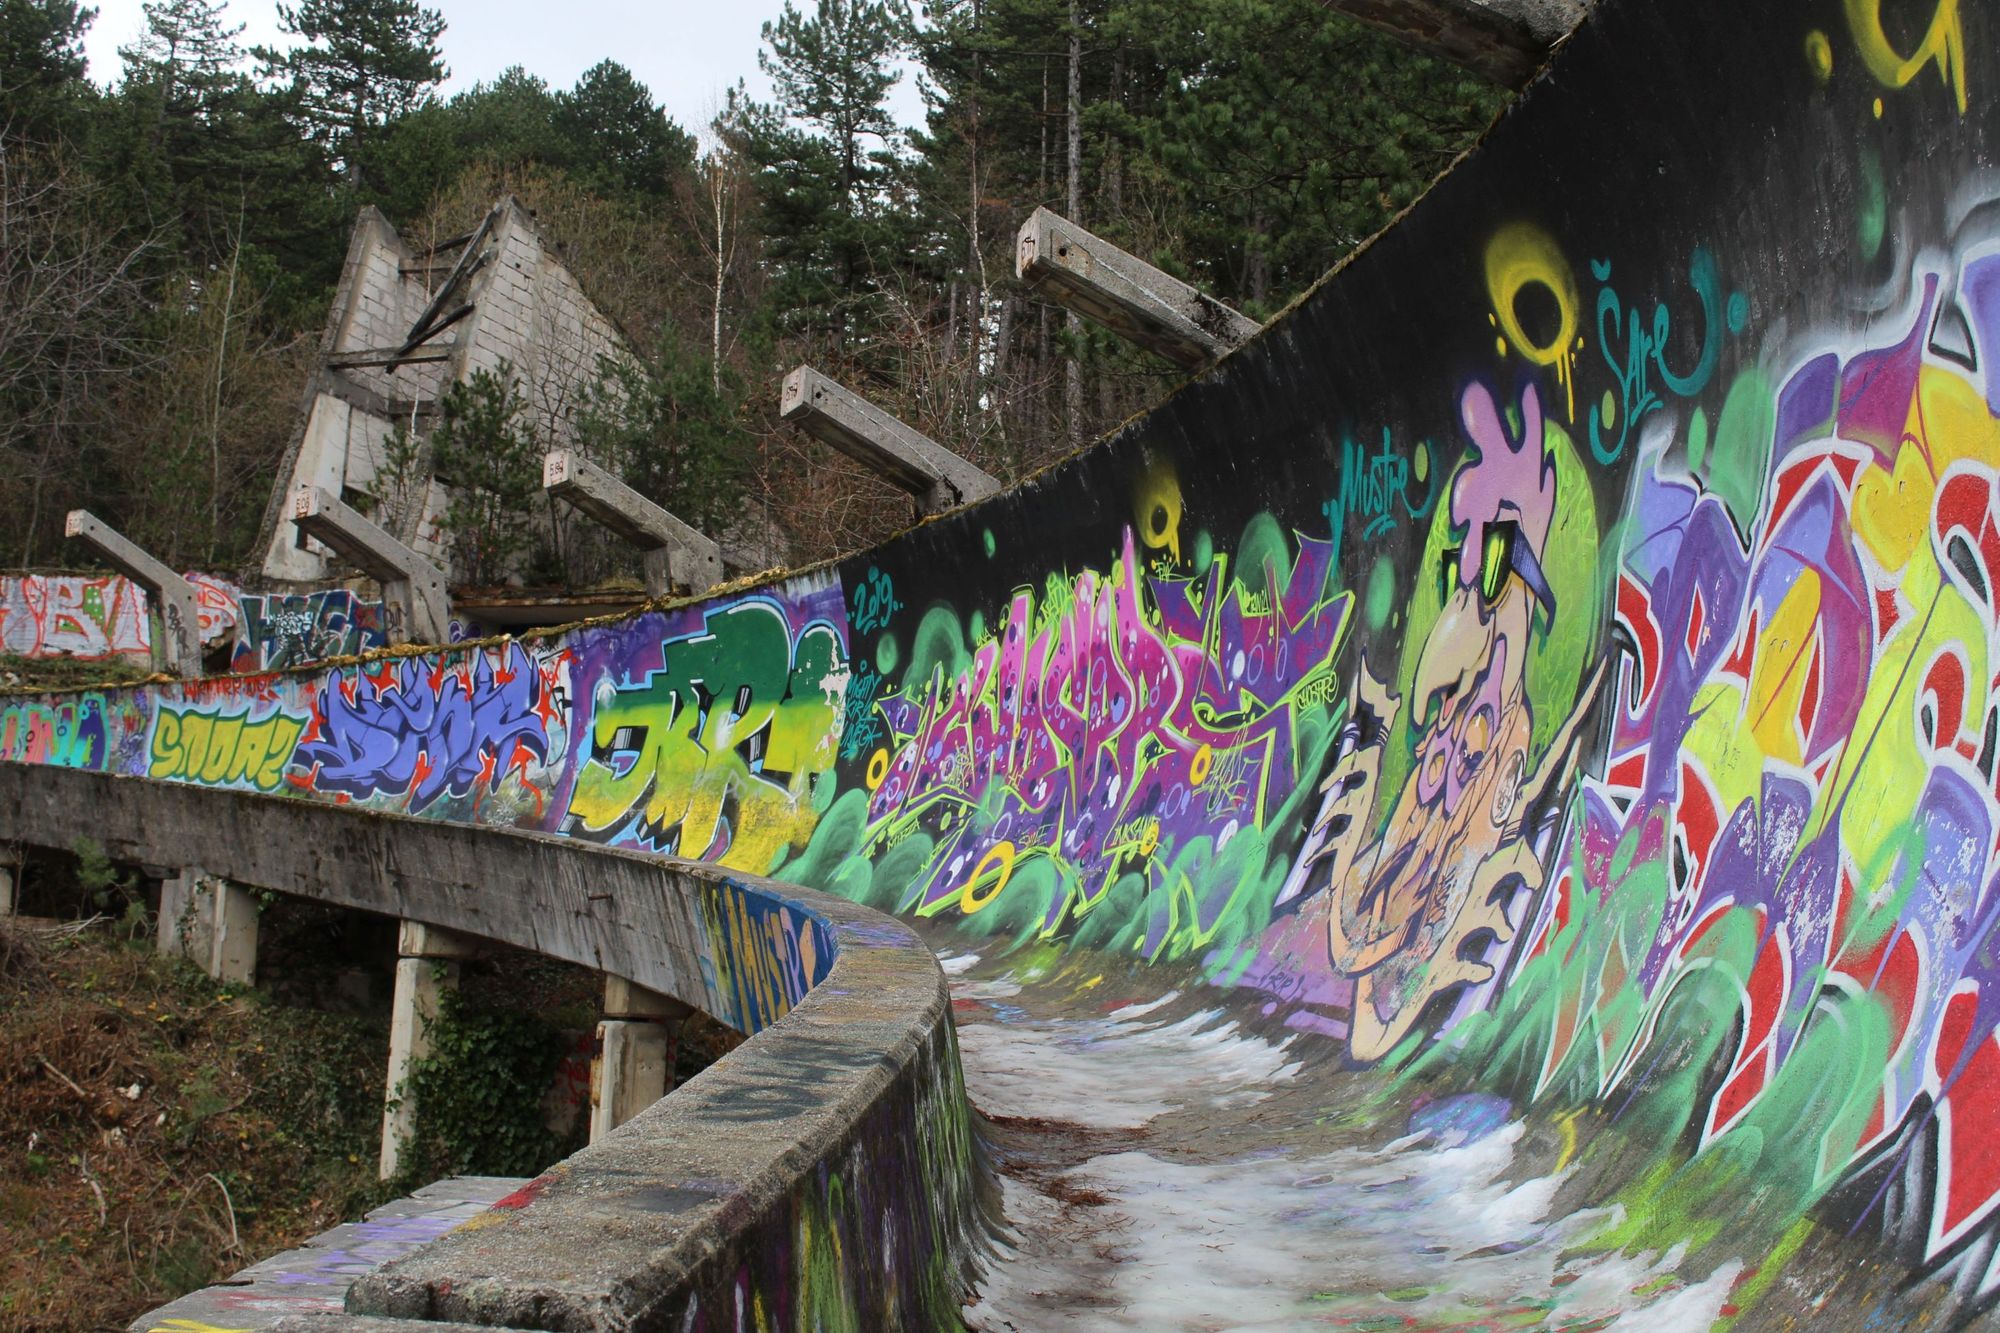 Graffiti now covers the bobsleigh and luge track where the 1984 Winter Olympics took place.